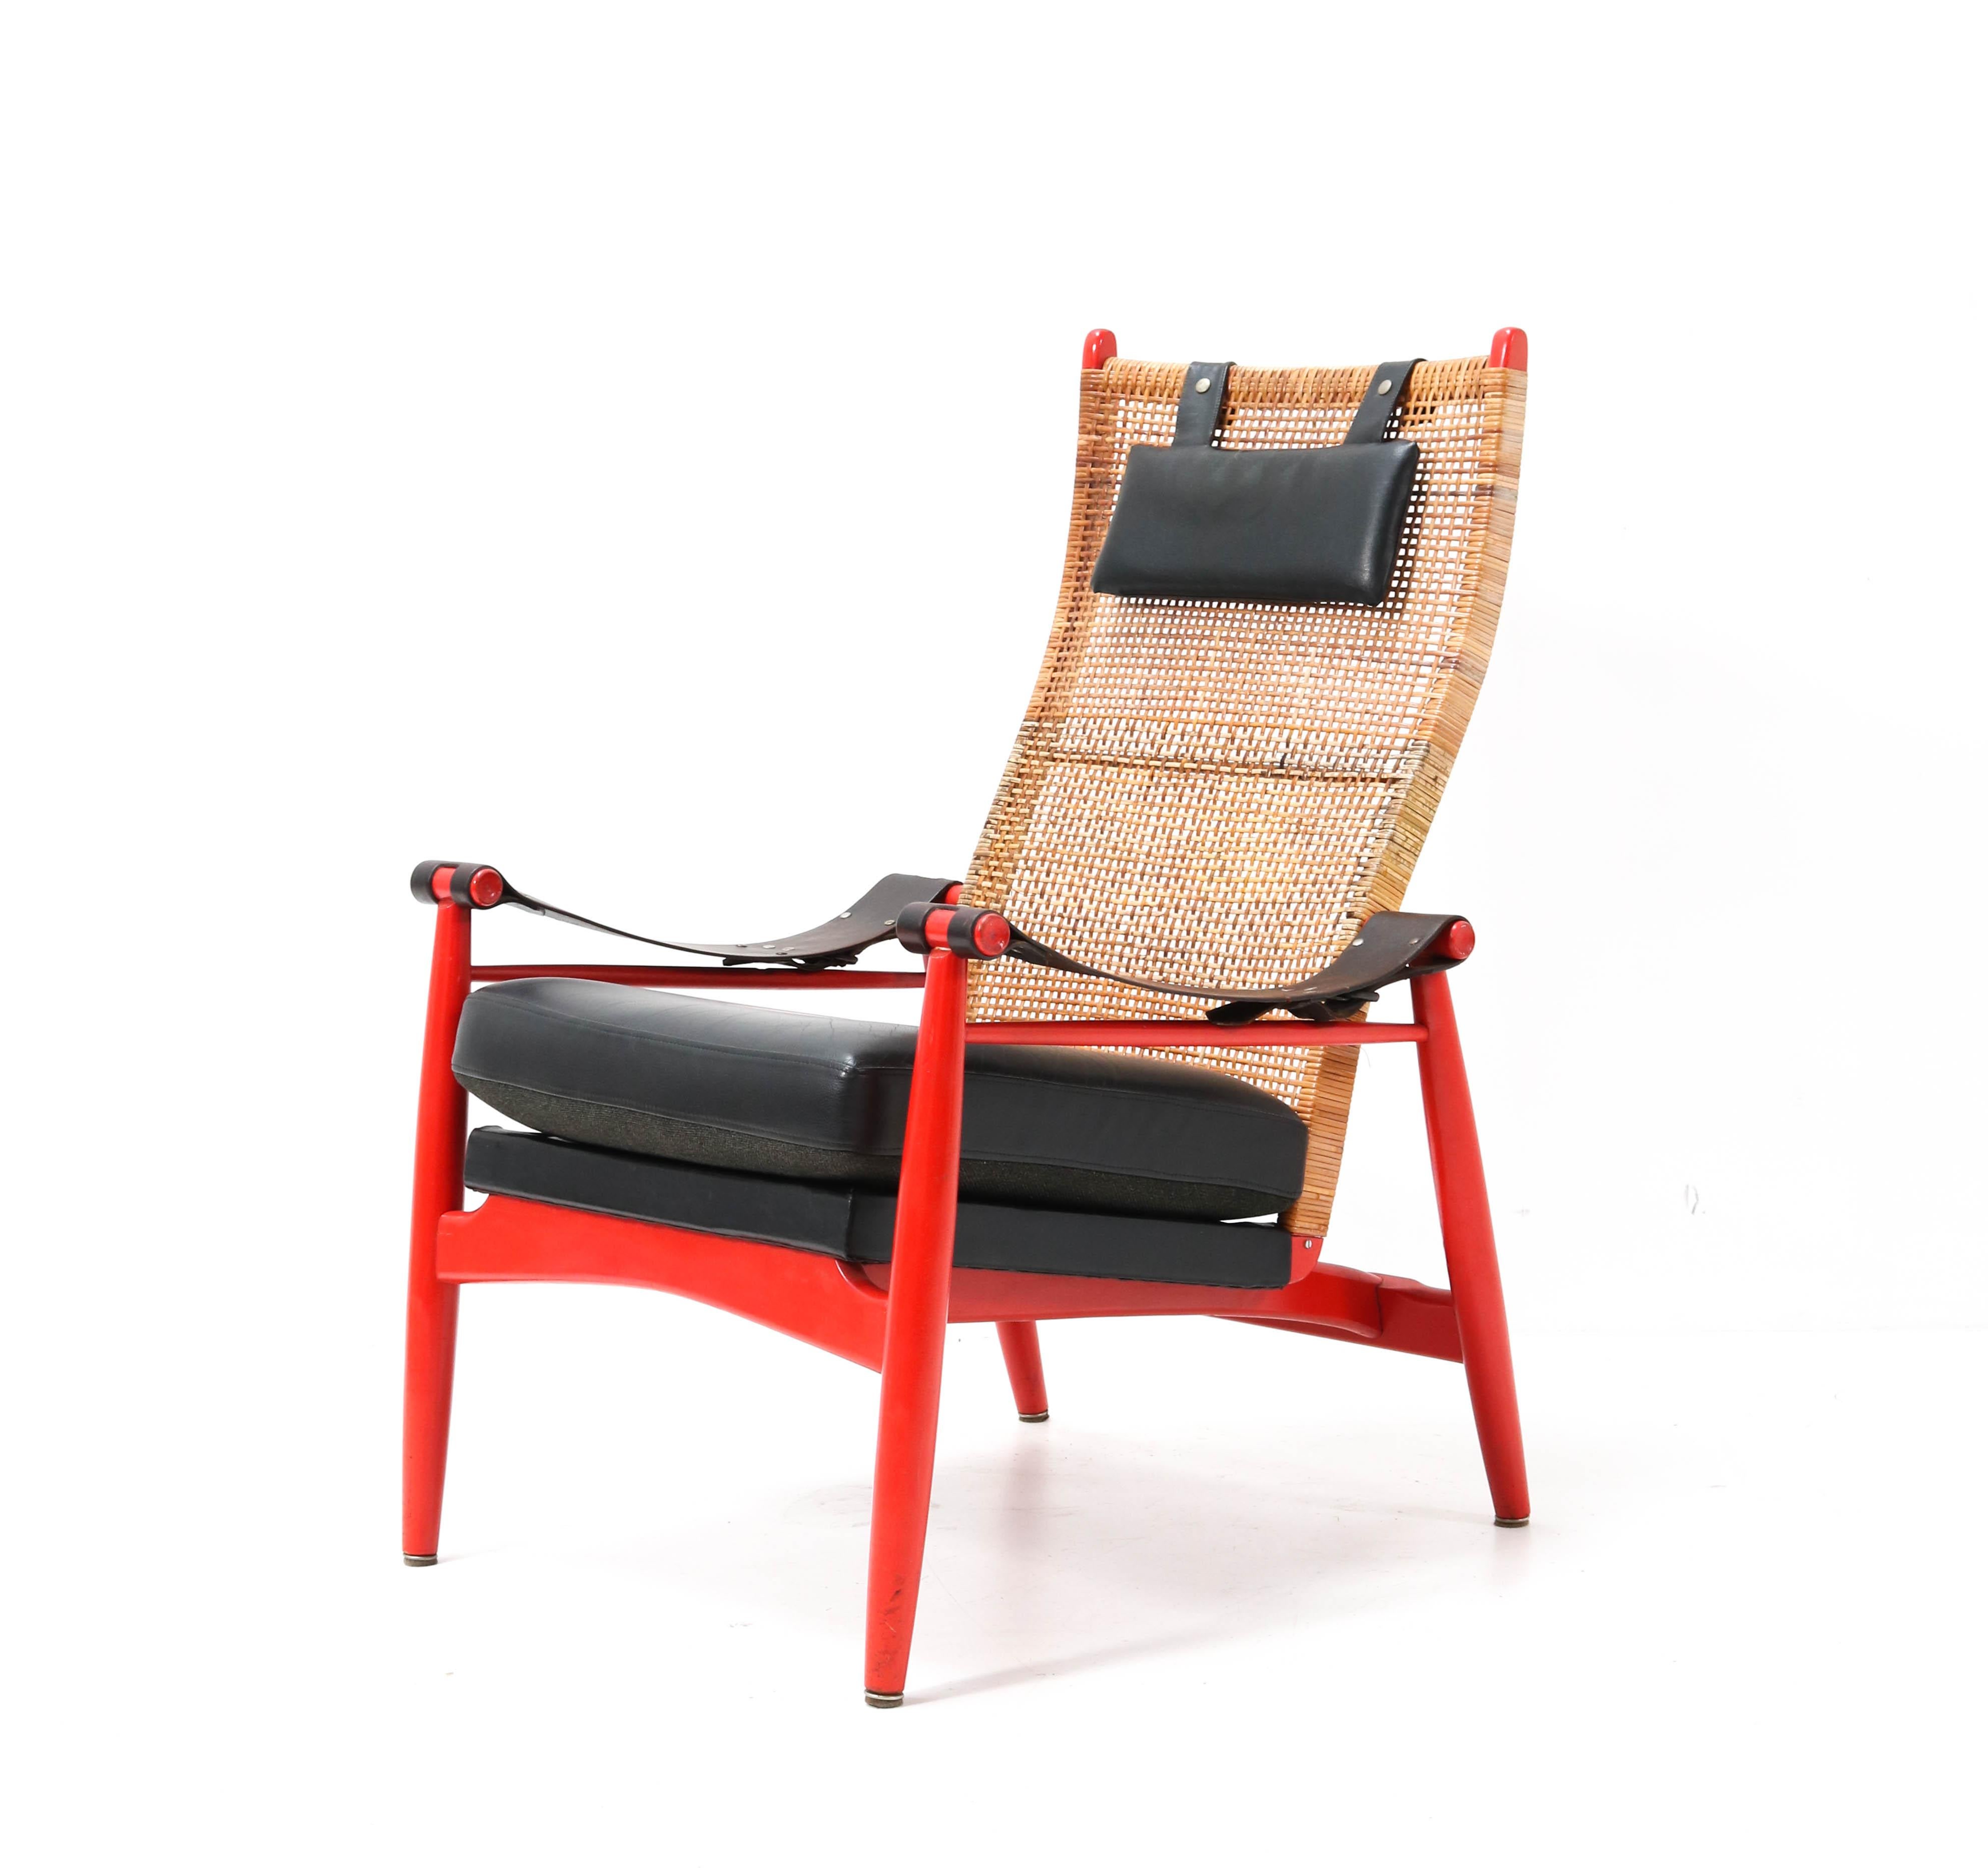 Stunning and rare Mid-Century Modern lounge chair.
Design by P.J. Muntendam for Gebroeders Jonker.
Striking Dutch design from the 1950s.
Red lacquered wooden frame with original leather armrests.
Original black leather cushion and black leather